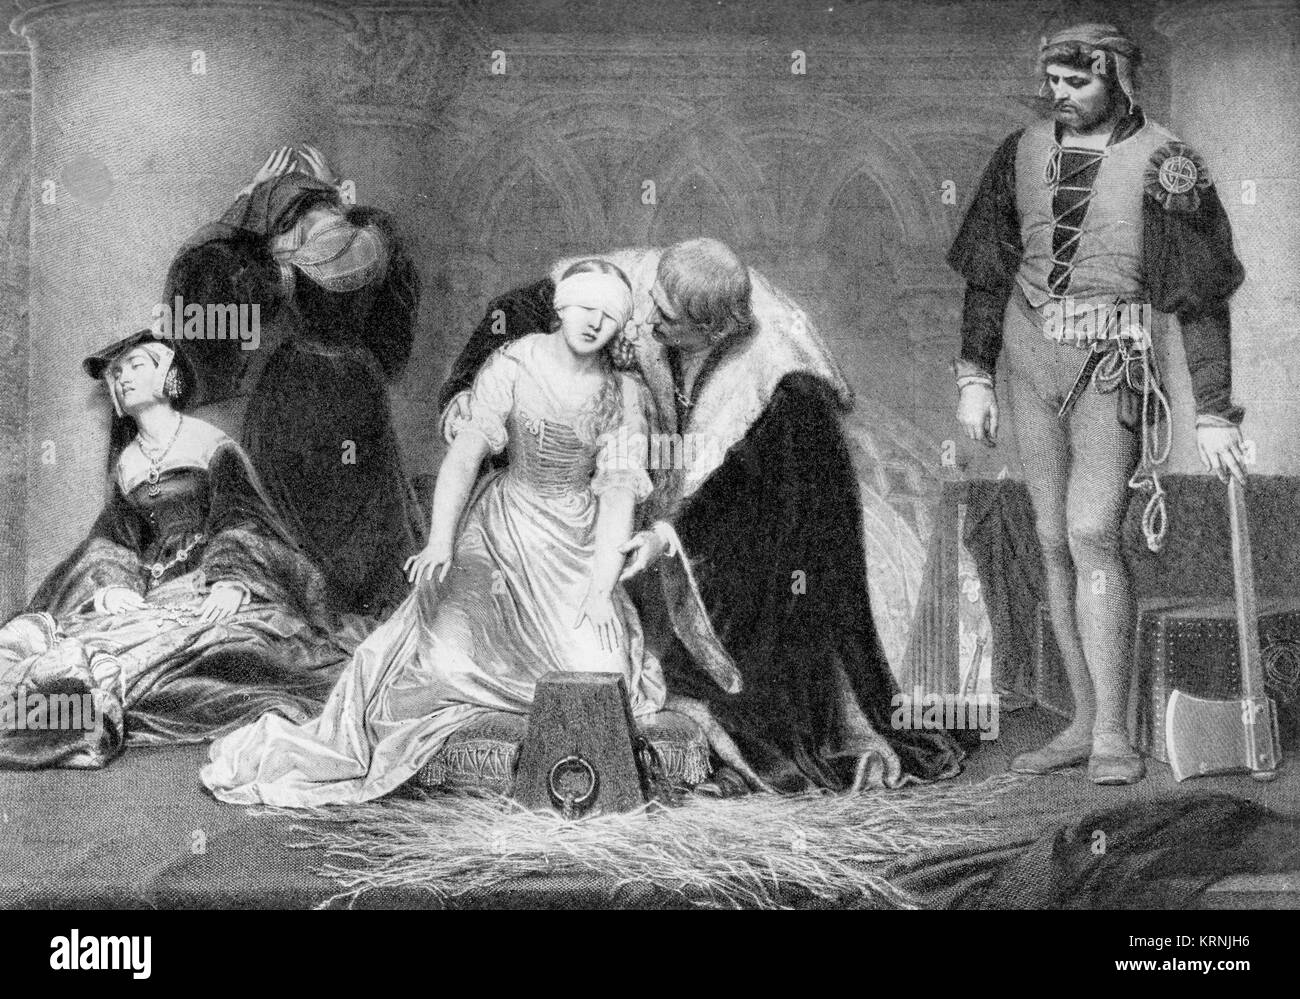 Half tone illustration of Lady Jane Grey's execution, 12-2-1554. From an original illustration in the Historian's History of the World, 1908, based on Stock Photo